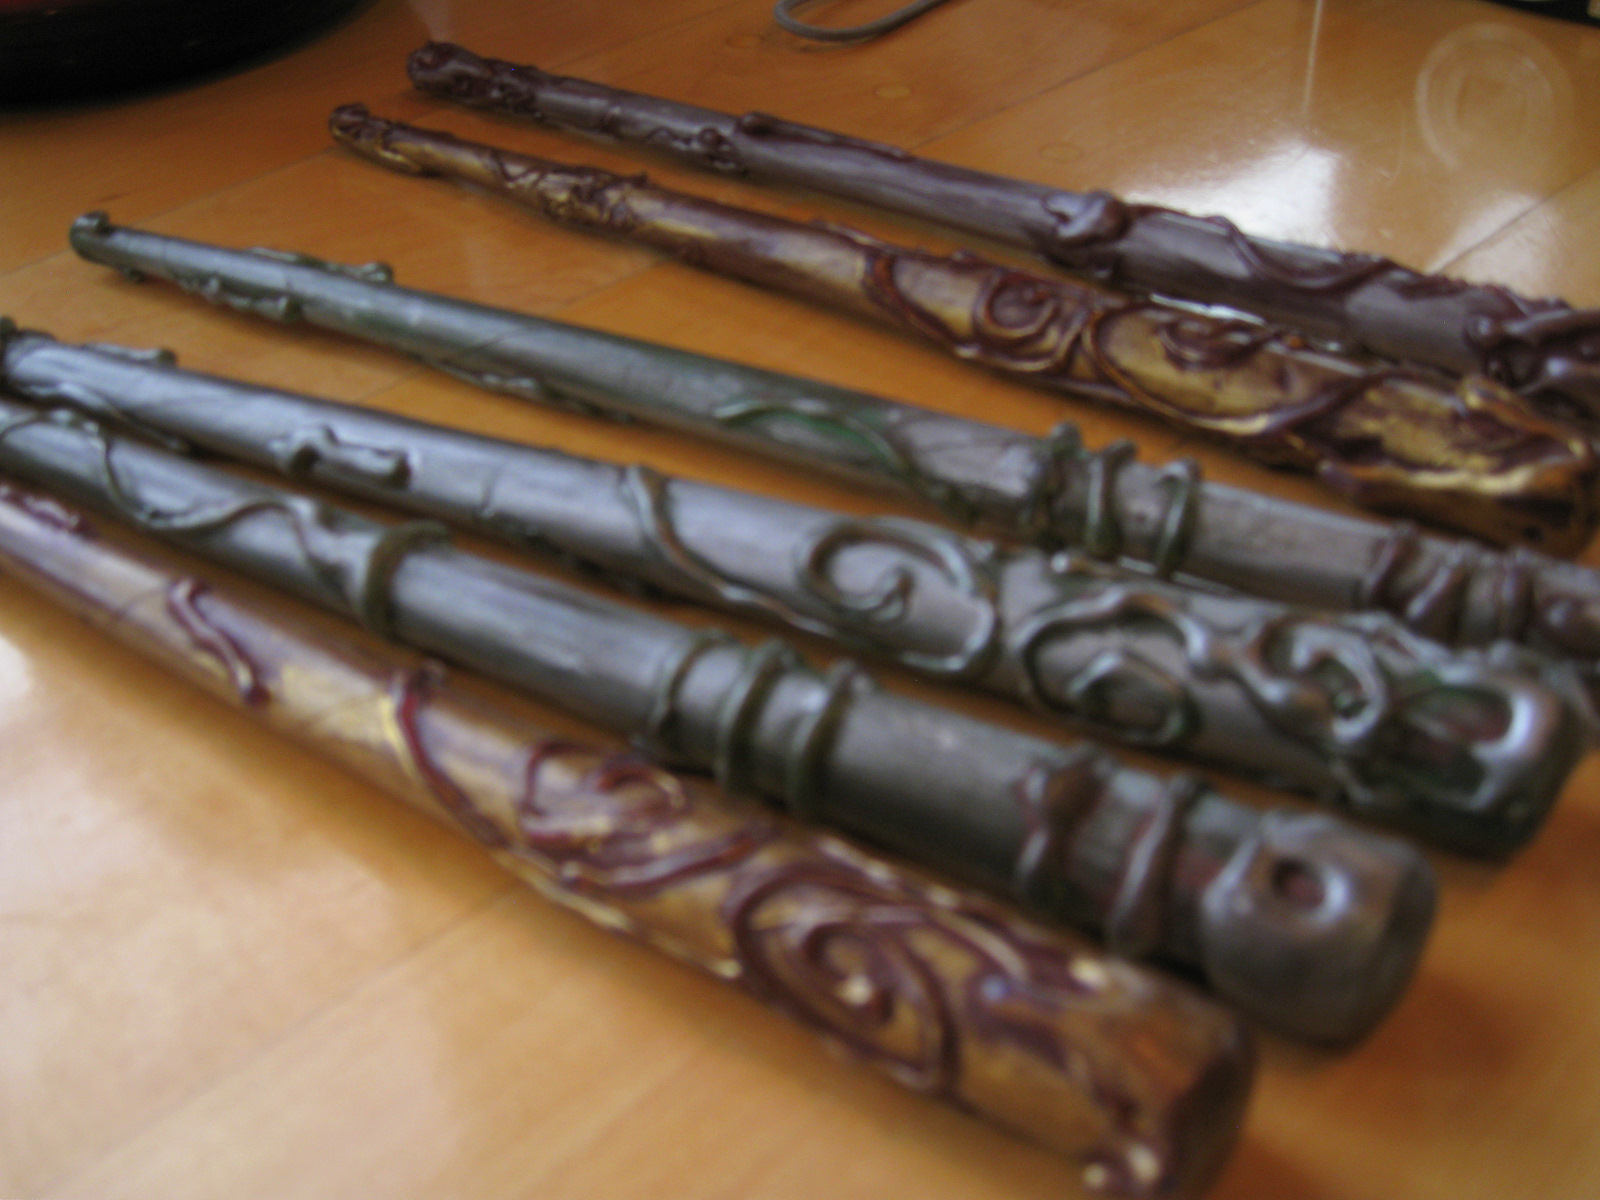 How To Make a Harry Potter Wand Craft - Mom Always Finds Out